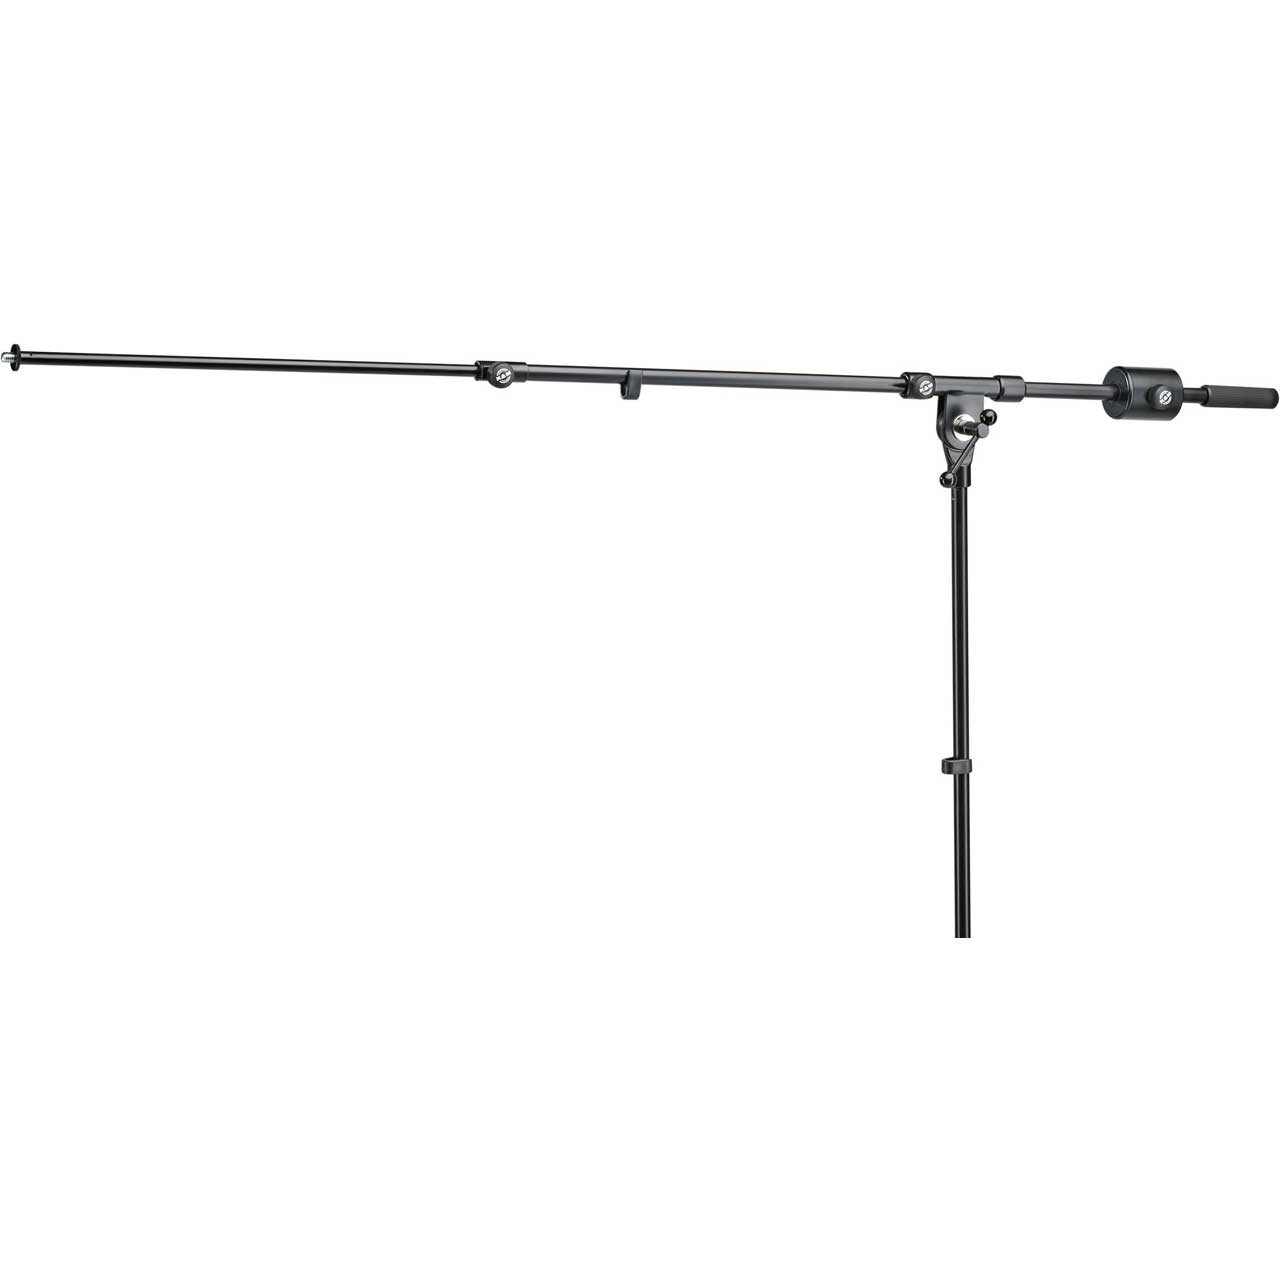 KM 25530 Extra Long Adjustable Microphone Boom Arm with Weight - Black